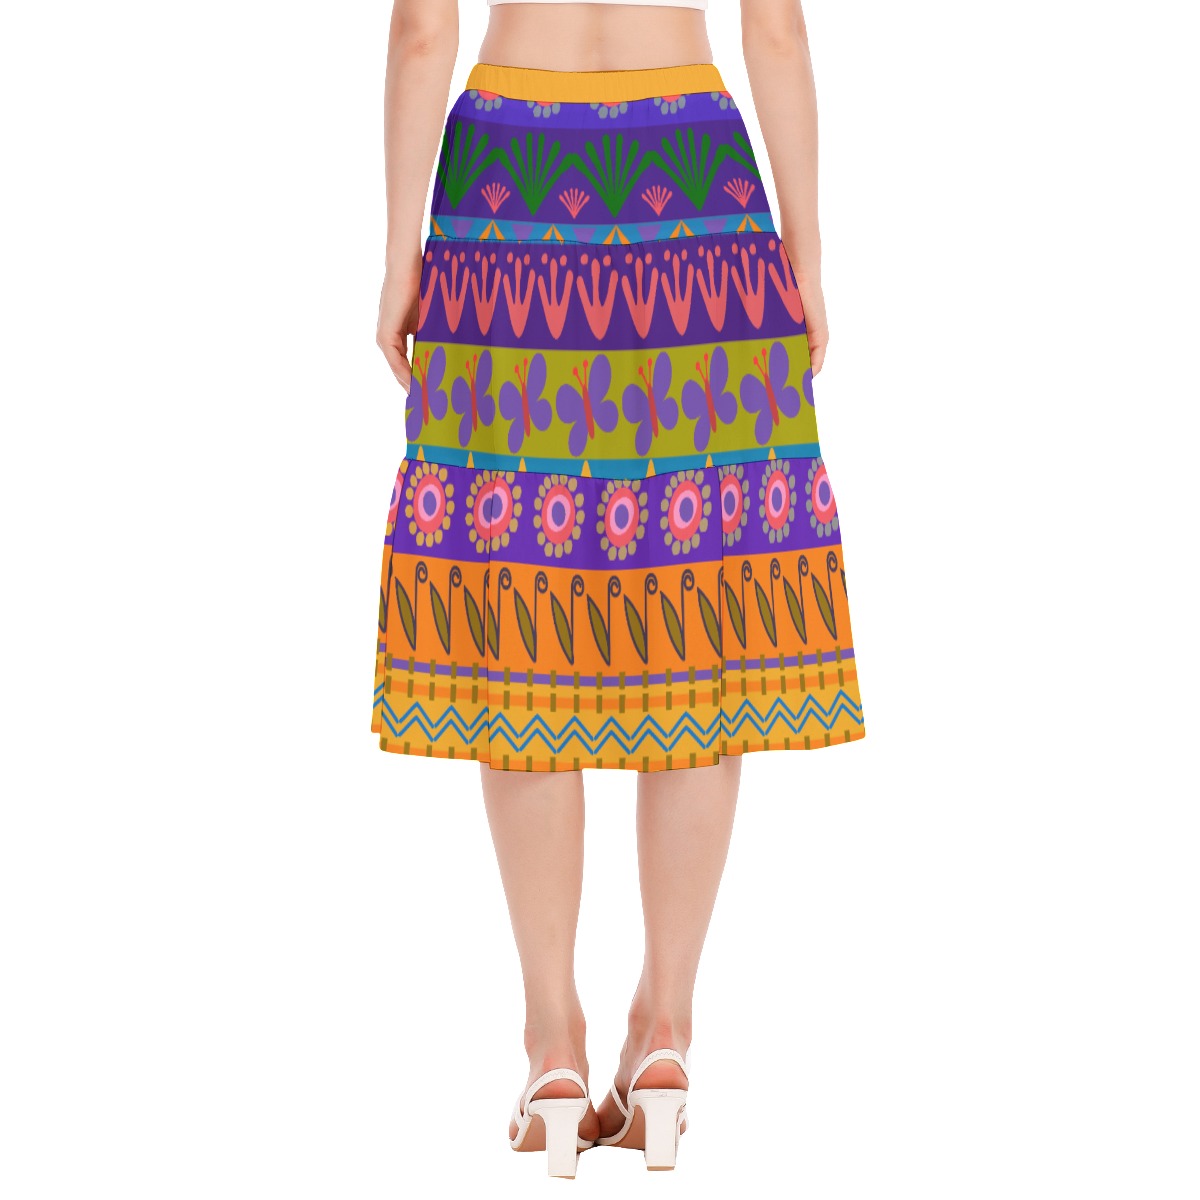 All-Over Print Women's Stitched Pleated Chiffon Skirt